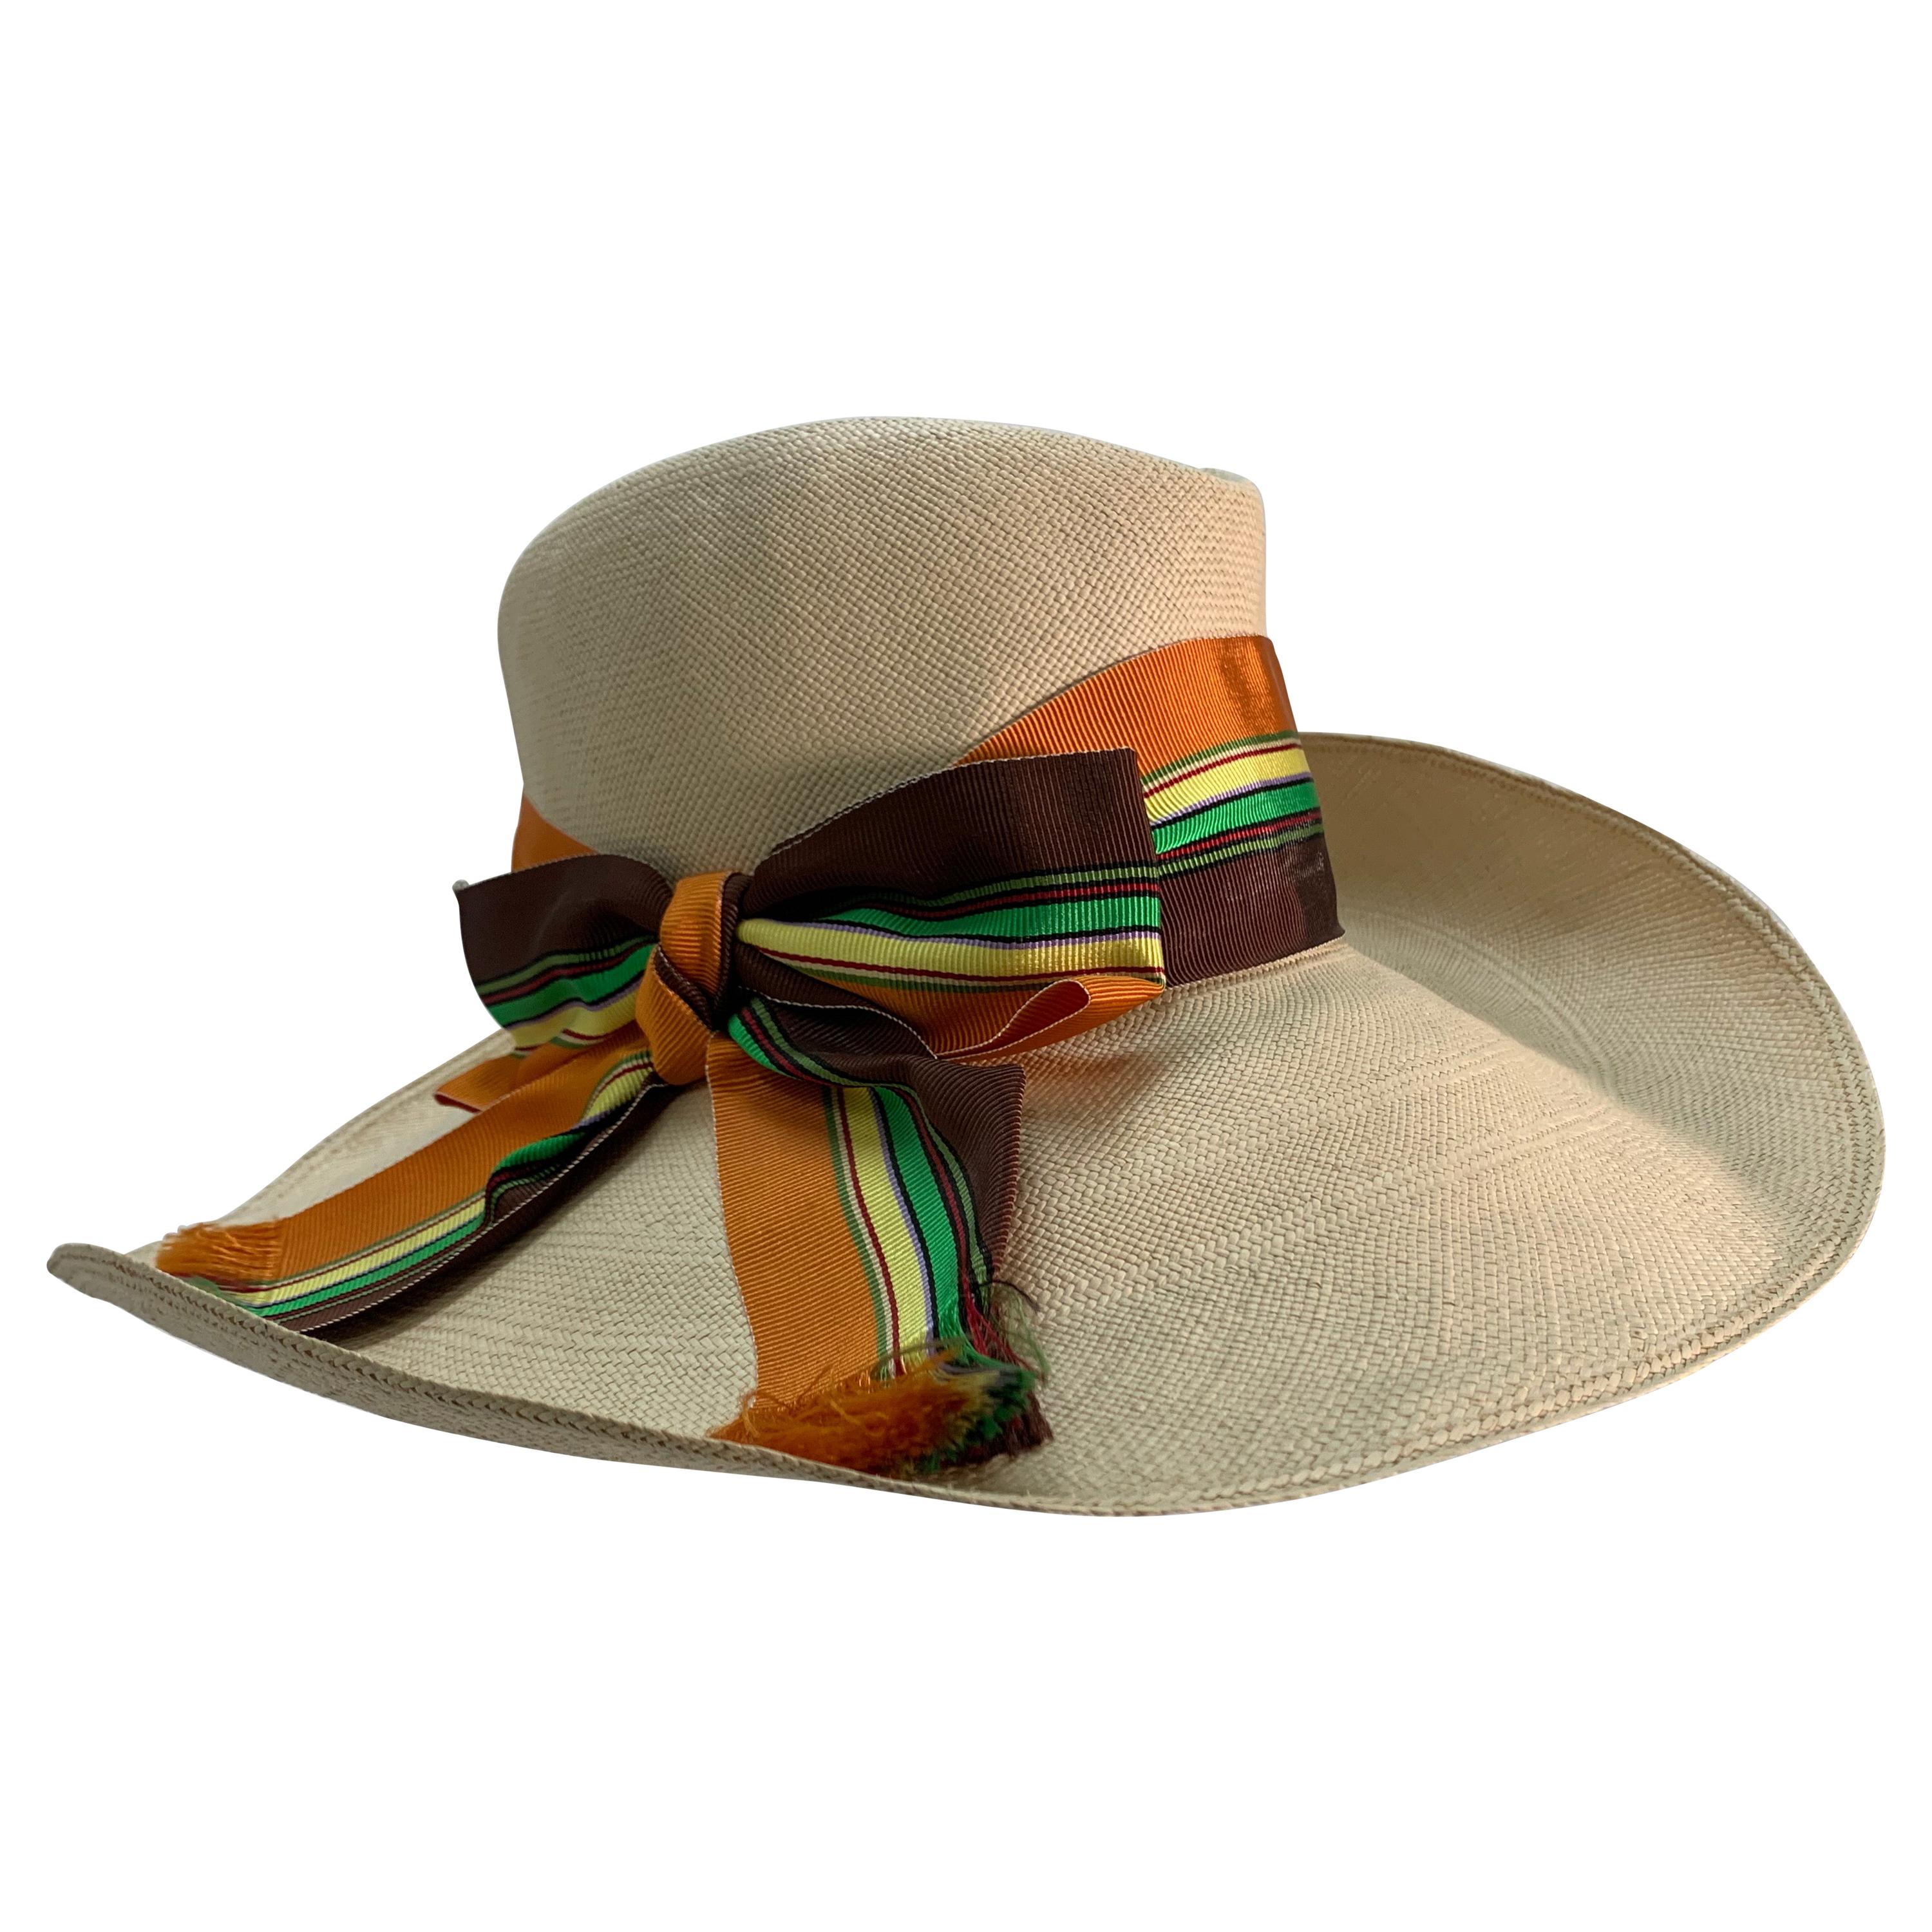 1960 Frank Olive Natural Straw Fedora Style Summer Hat W/Colorful Grosgrain Bow